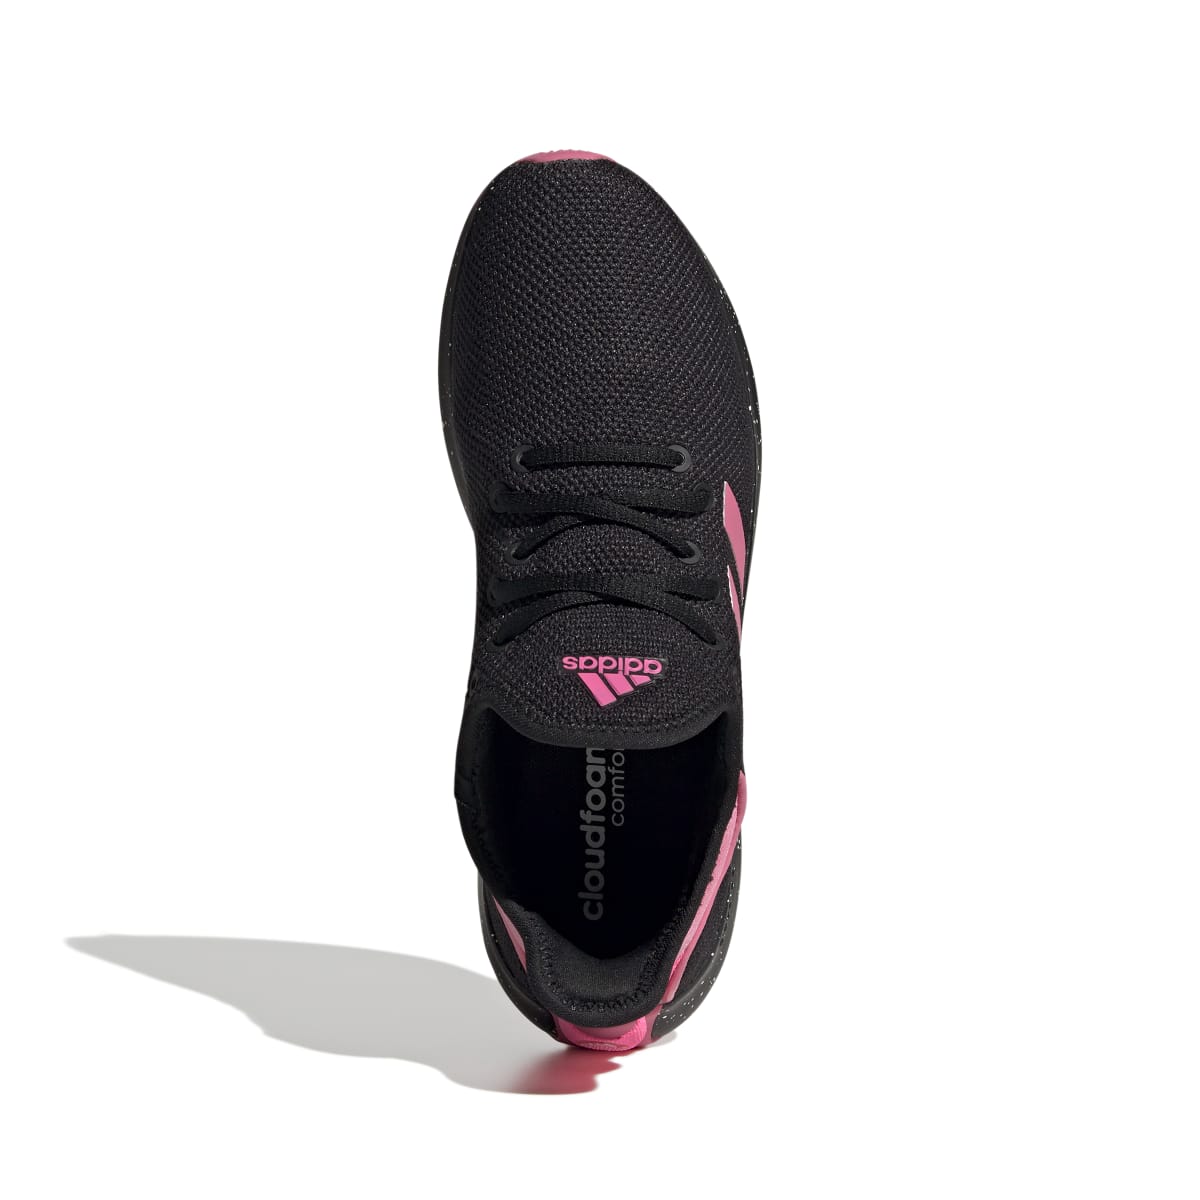 ADIDAS IG7380 CLOUDFOAM PURE SPW WMN'S (Medium) Black/Pink/Pink Textile Running Shoes